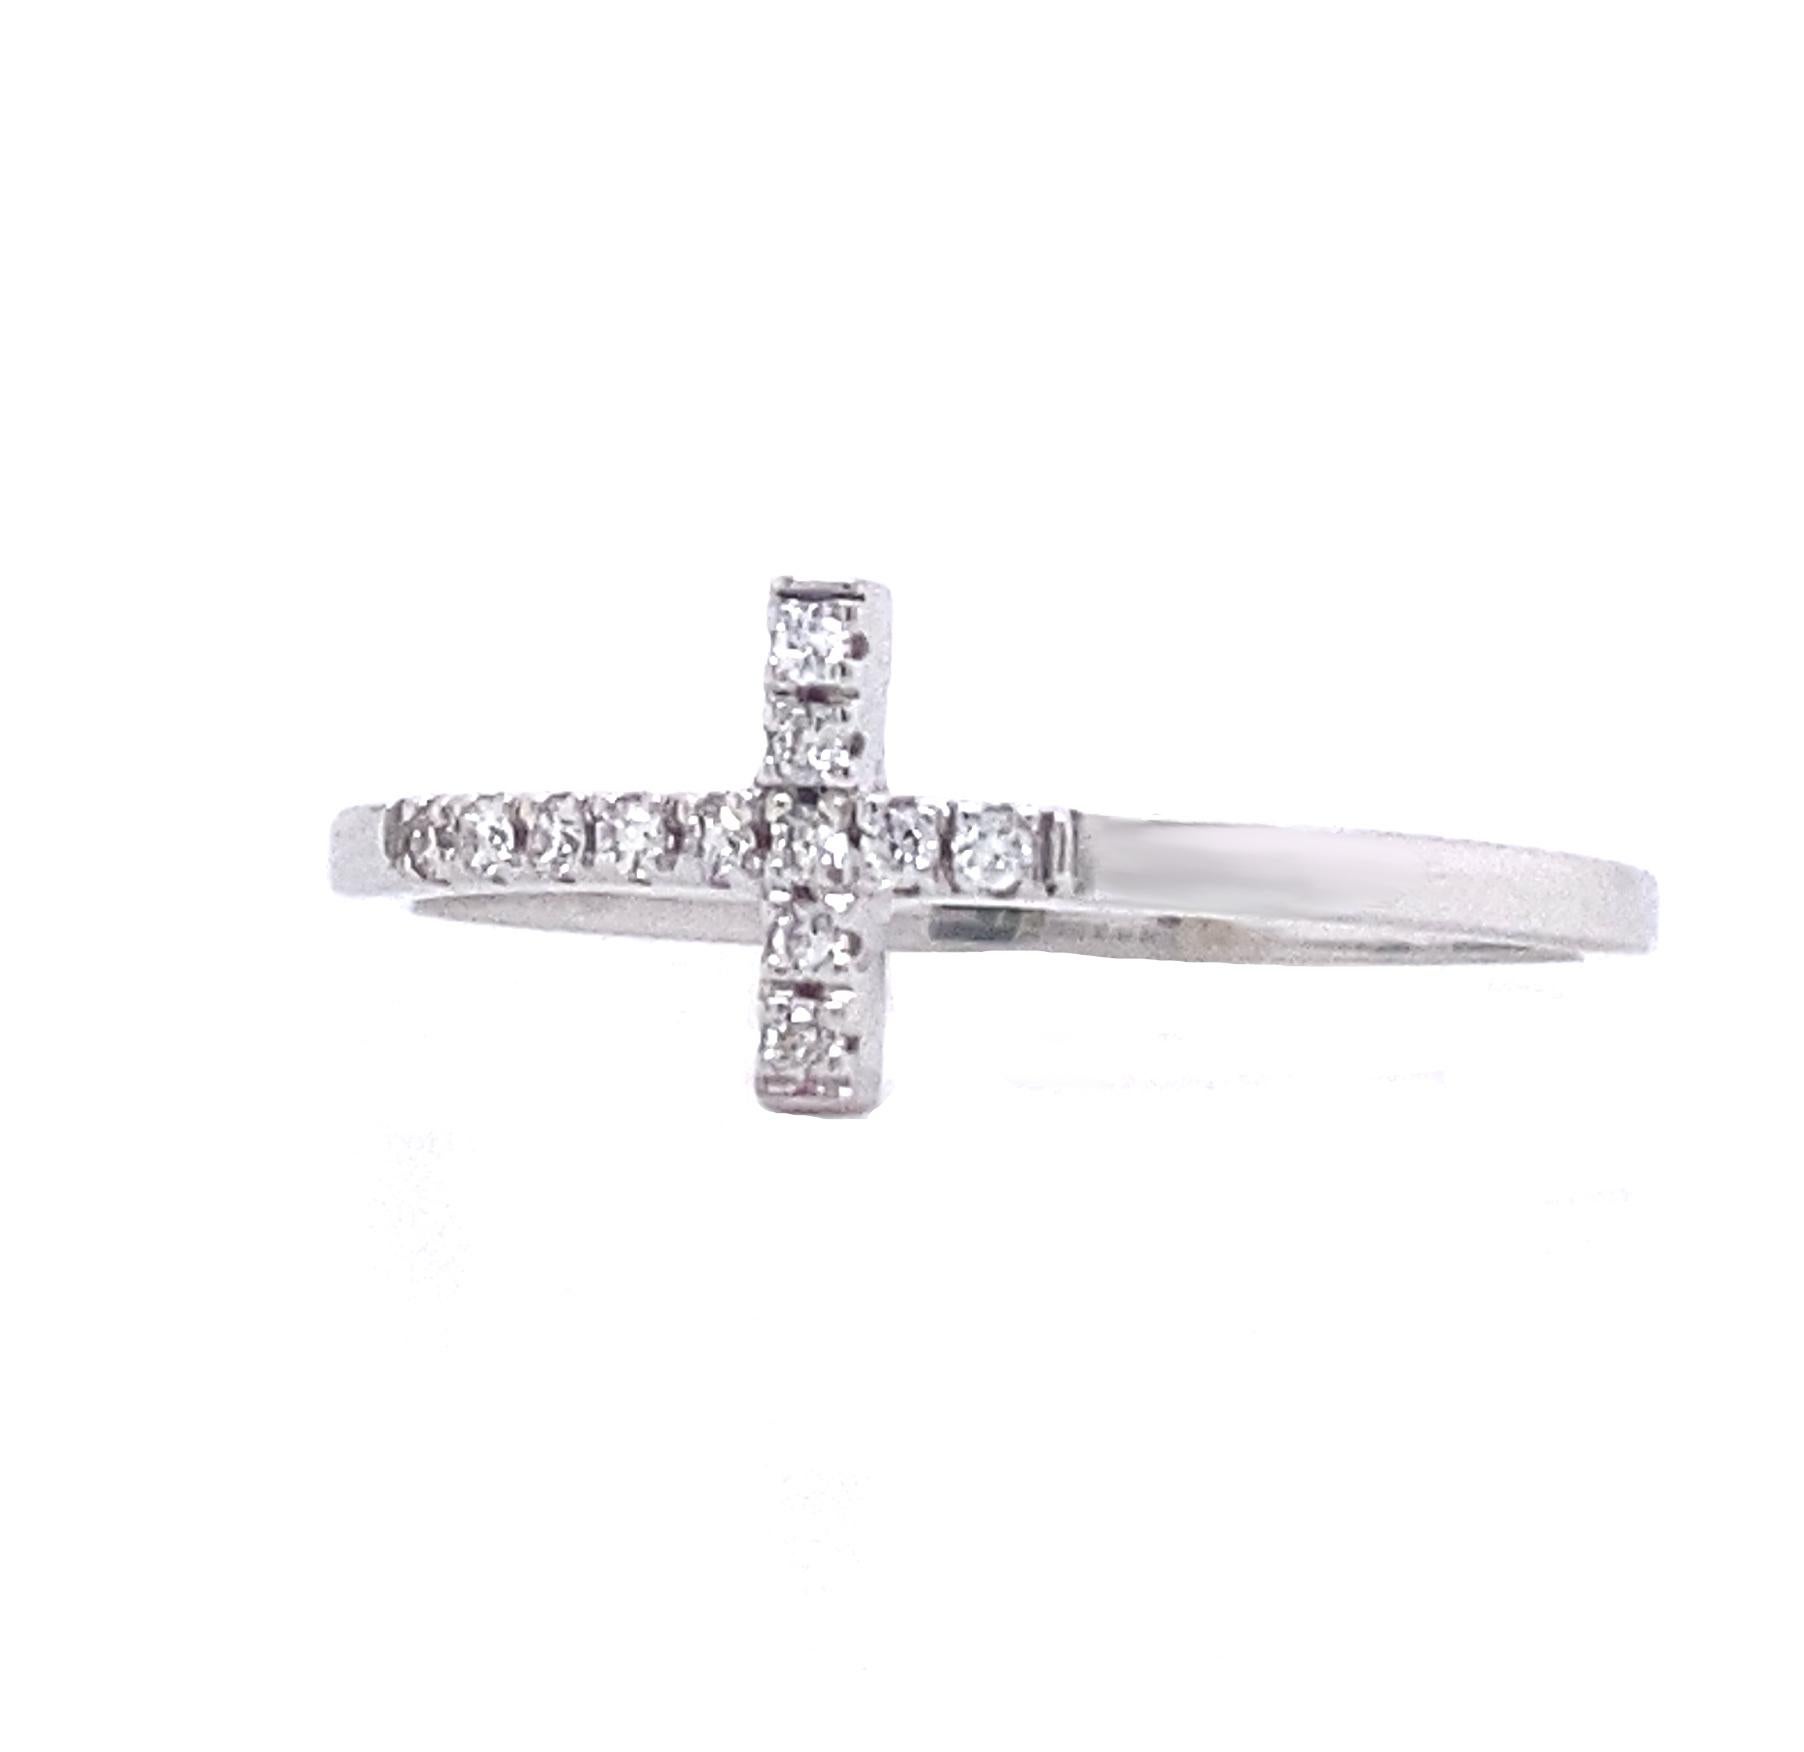 This ring has been masterfully created entirely by hand from 18-karat white gold and contains white G VS diamonds.

The photographed ring is an EU 15/US 7.25 ring size. It can be re-made in any ring size on request. Custom pieces require 1 month to